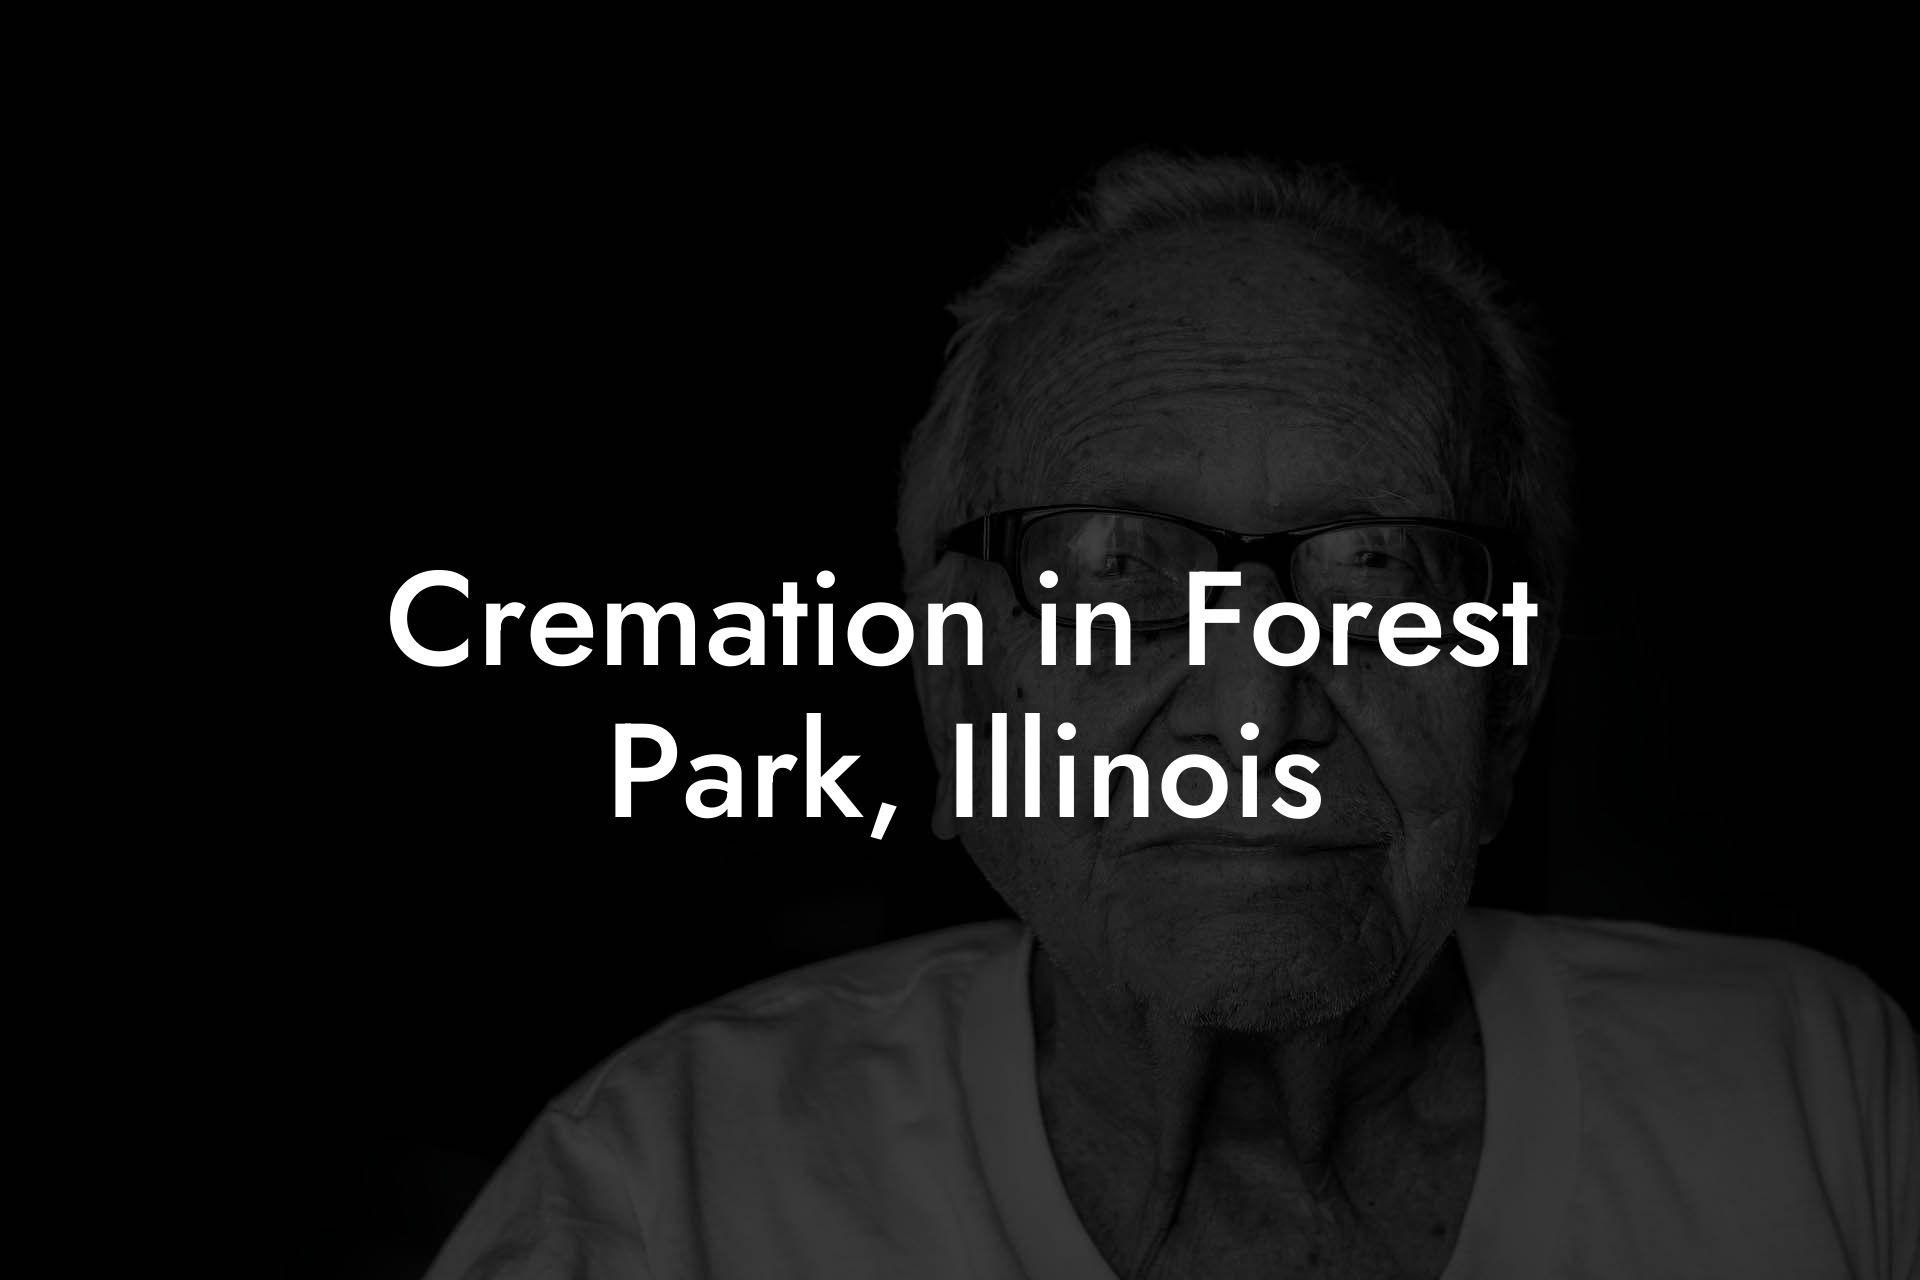 Cremation in Forest Park, Illinois